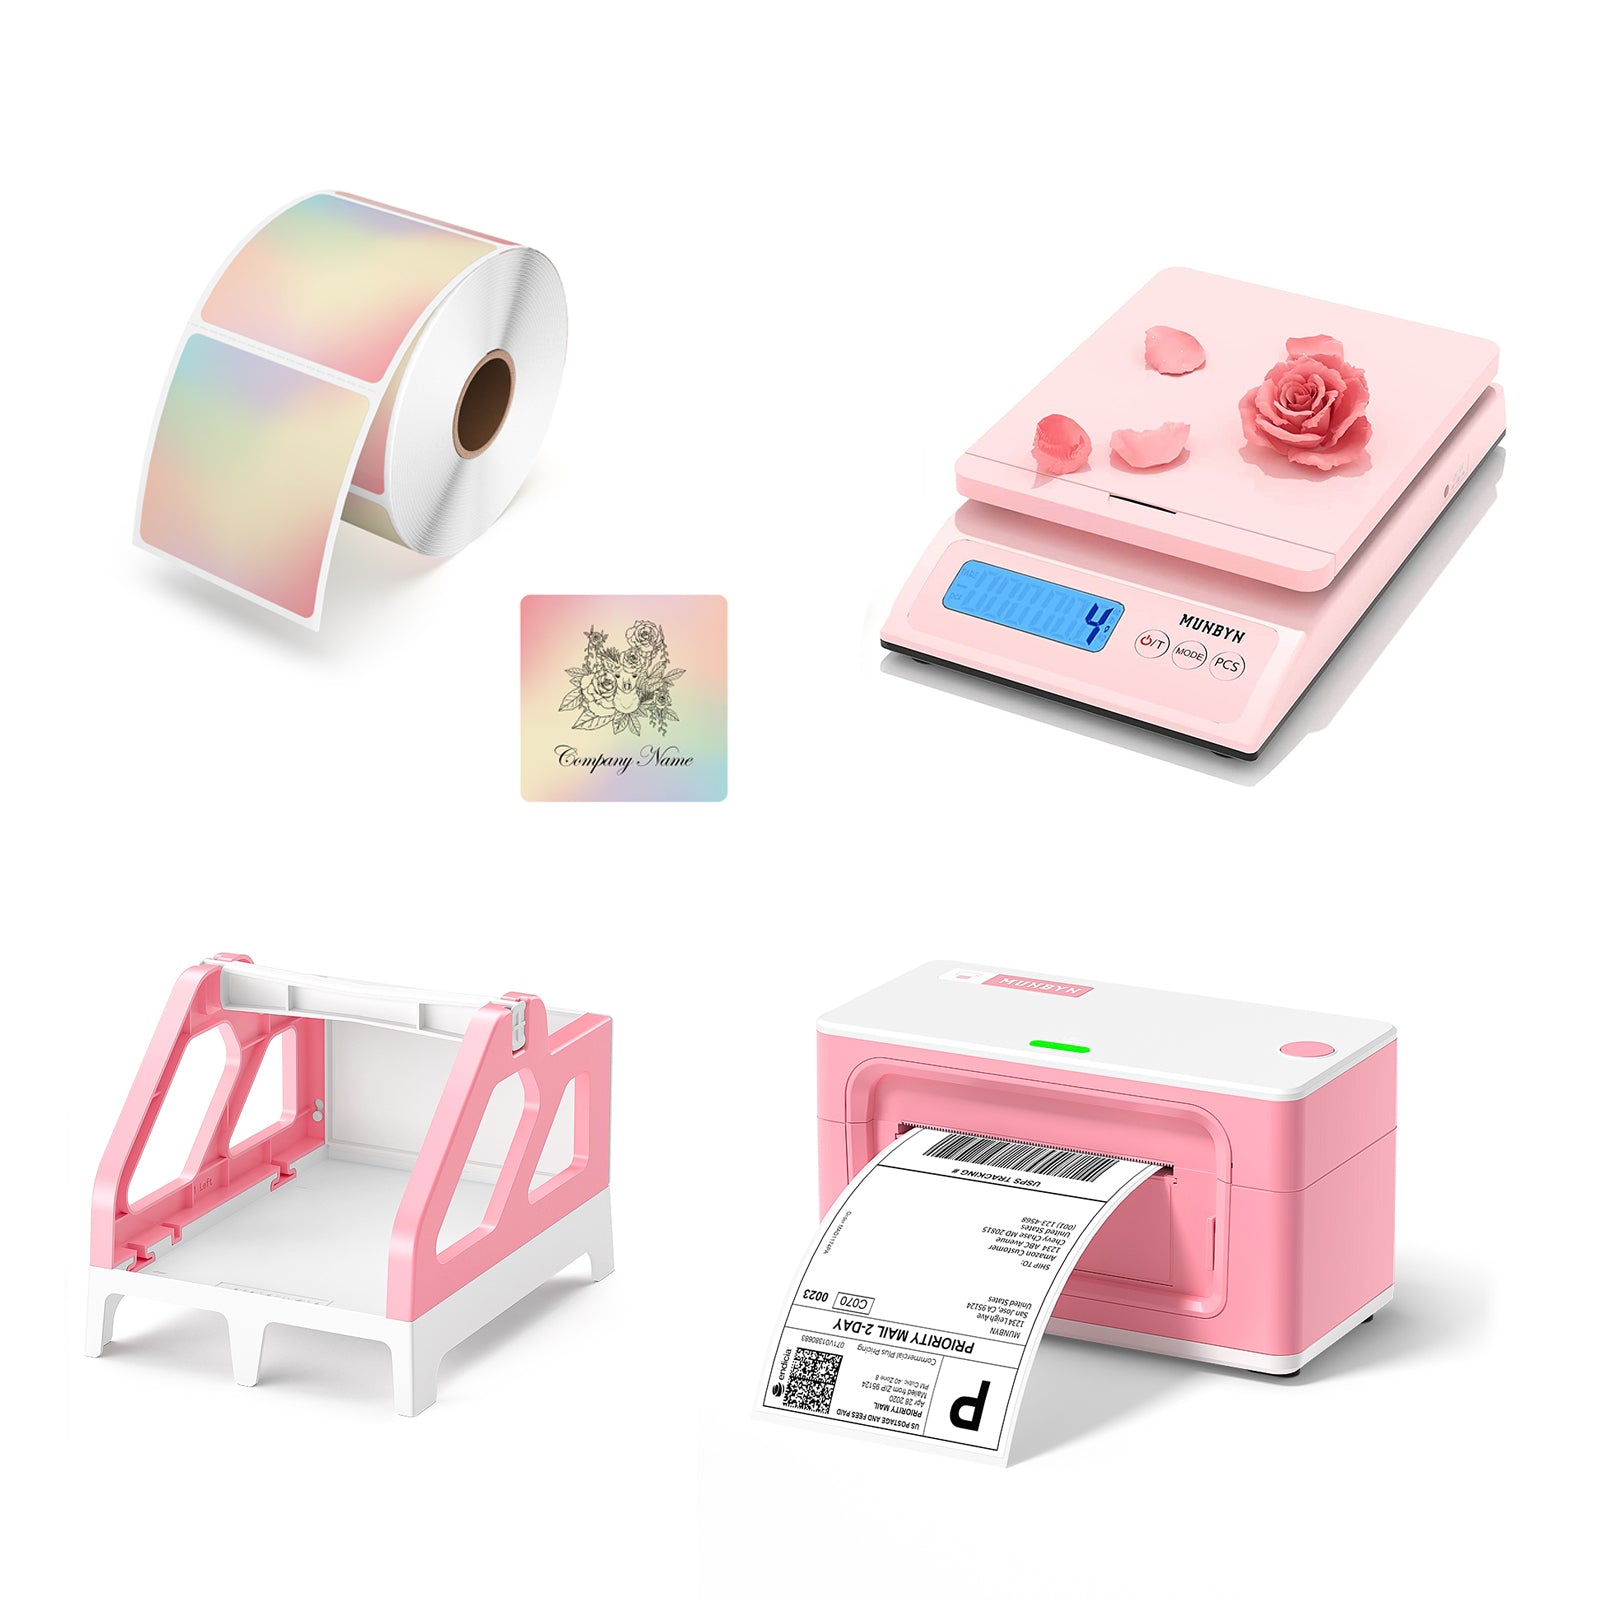 MUNBYN Pink Printer Color Label Kit includes a roll of color square labels, a postage scale, a pink printer and a label holder.